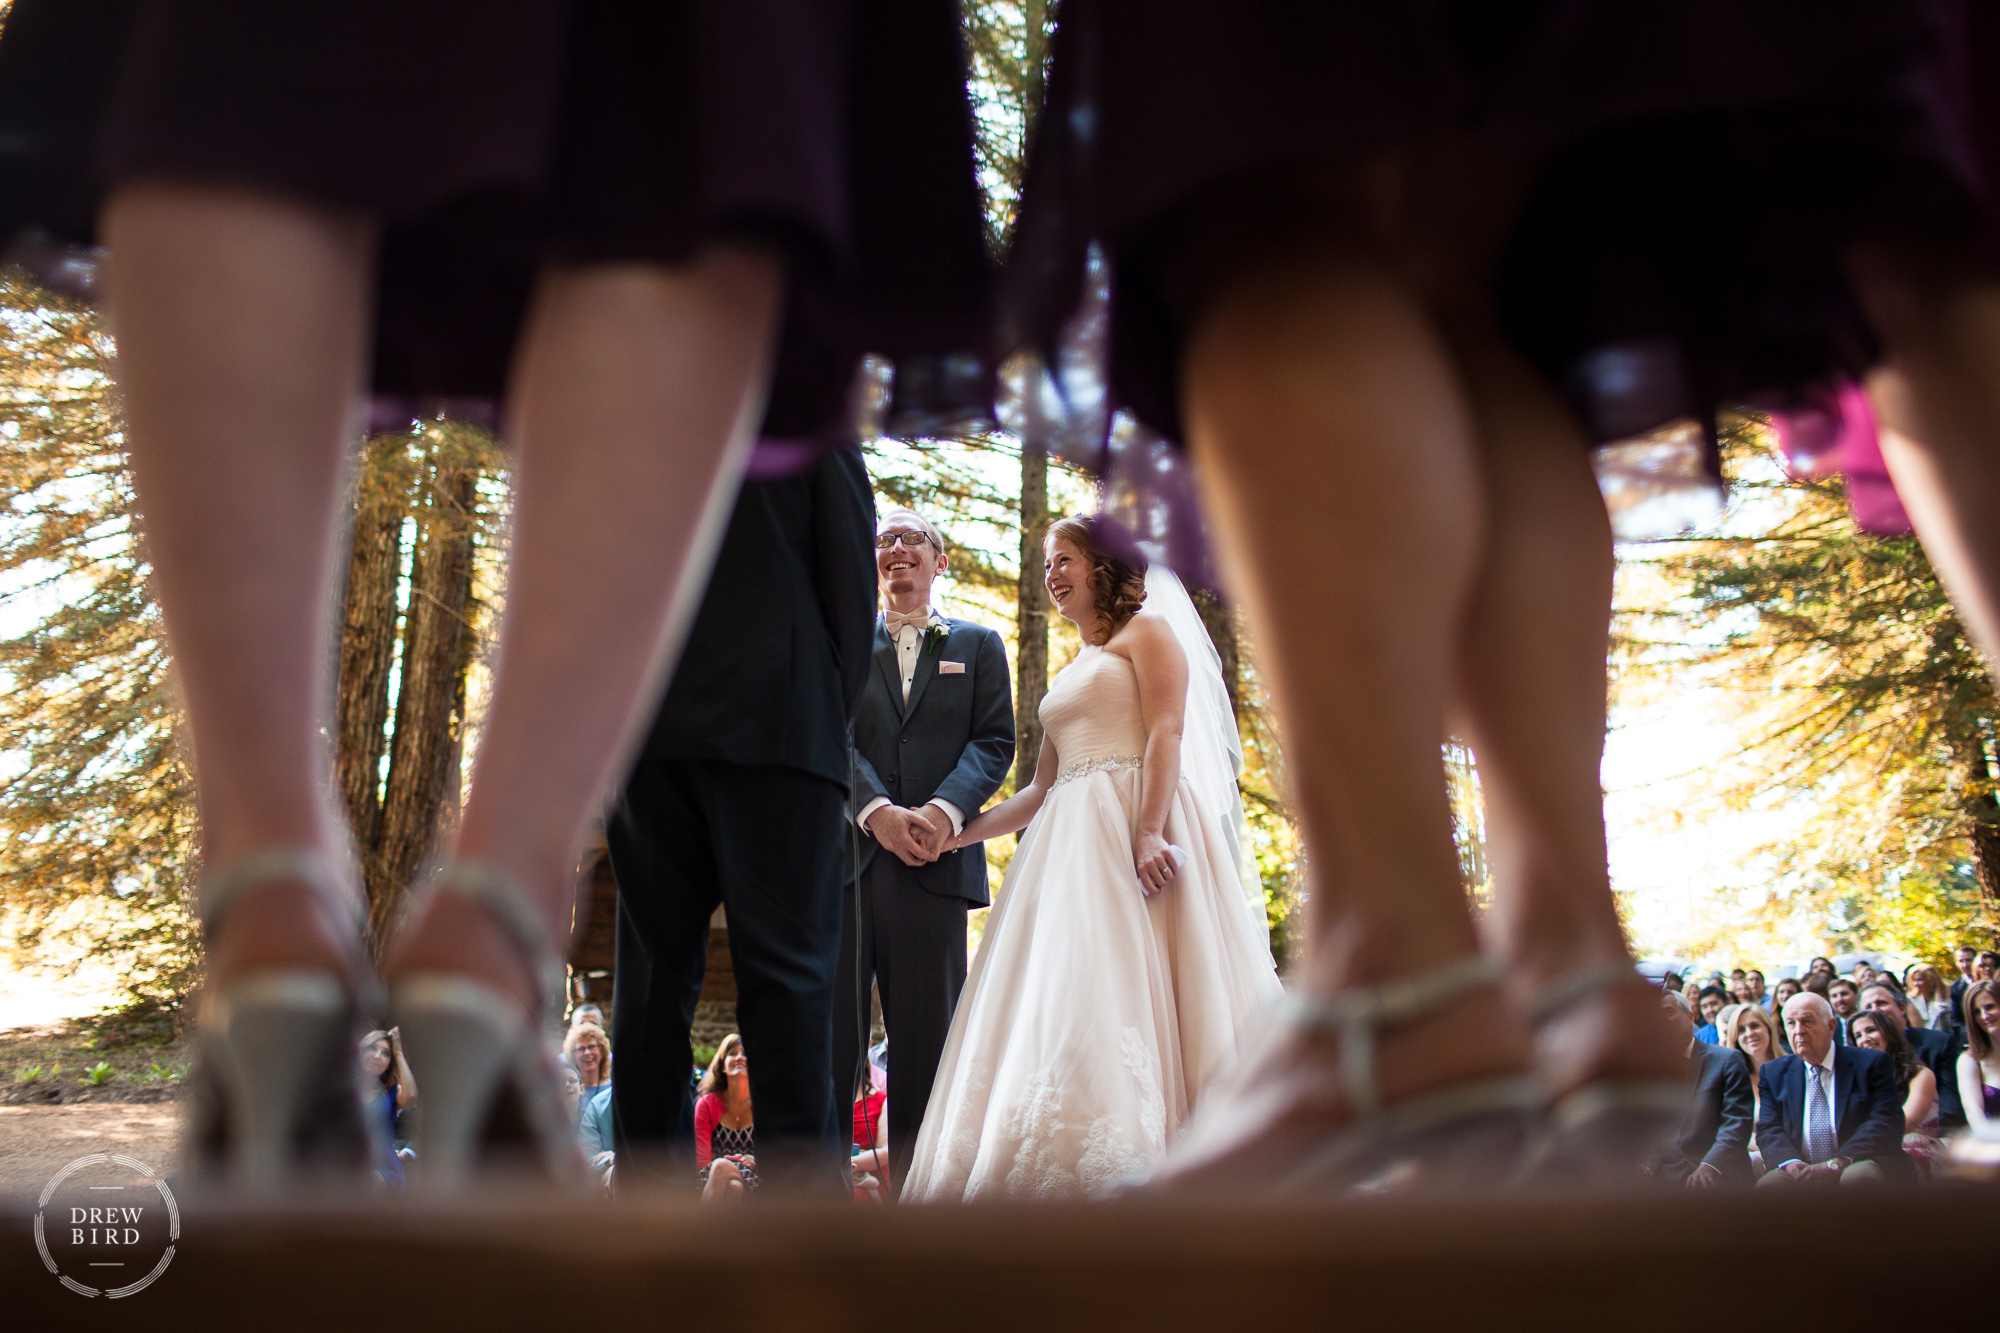 Bride and groom during redwood forest wedding ceremony. The Grove & Occidental Union Hotel Sonoma wedding venue.